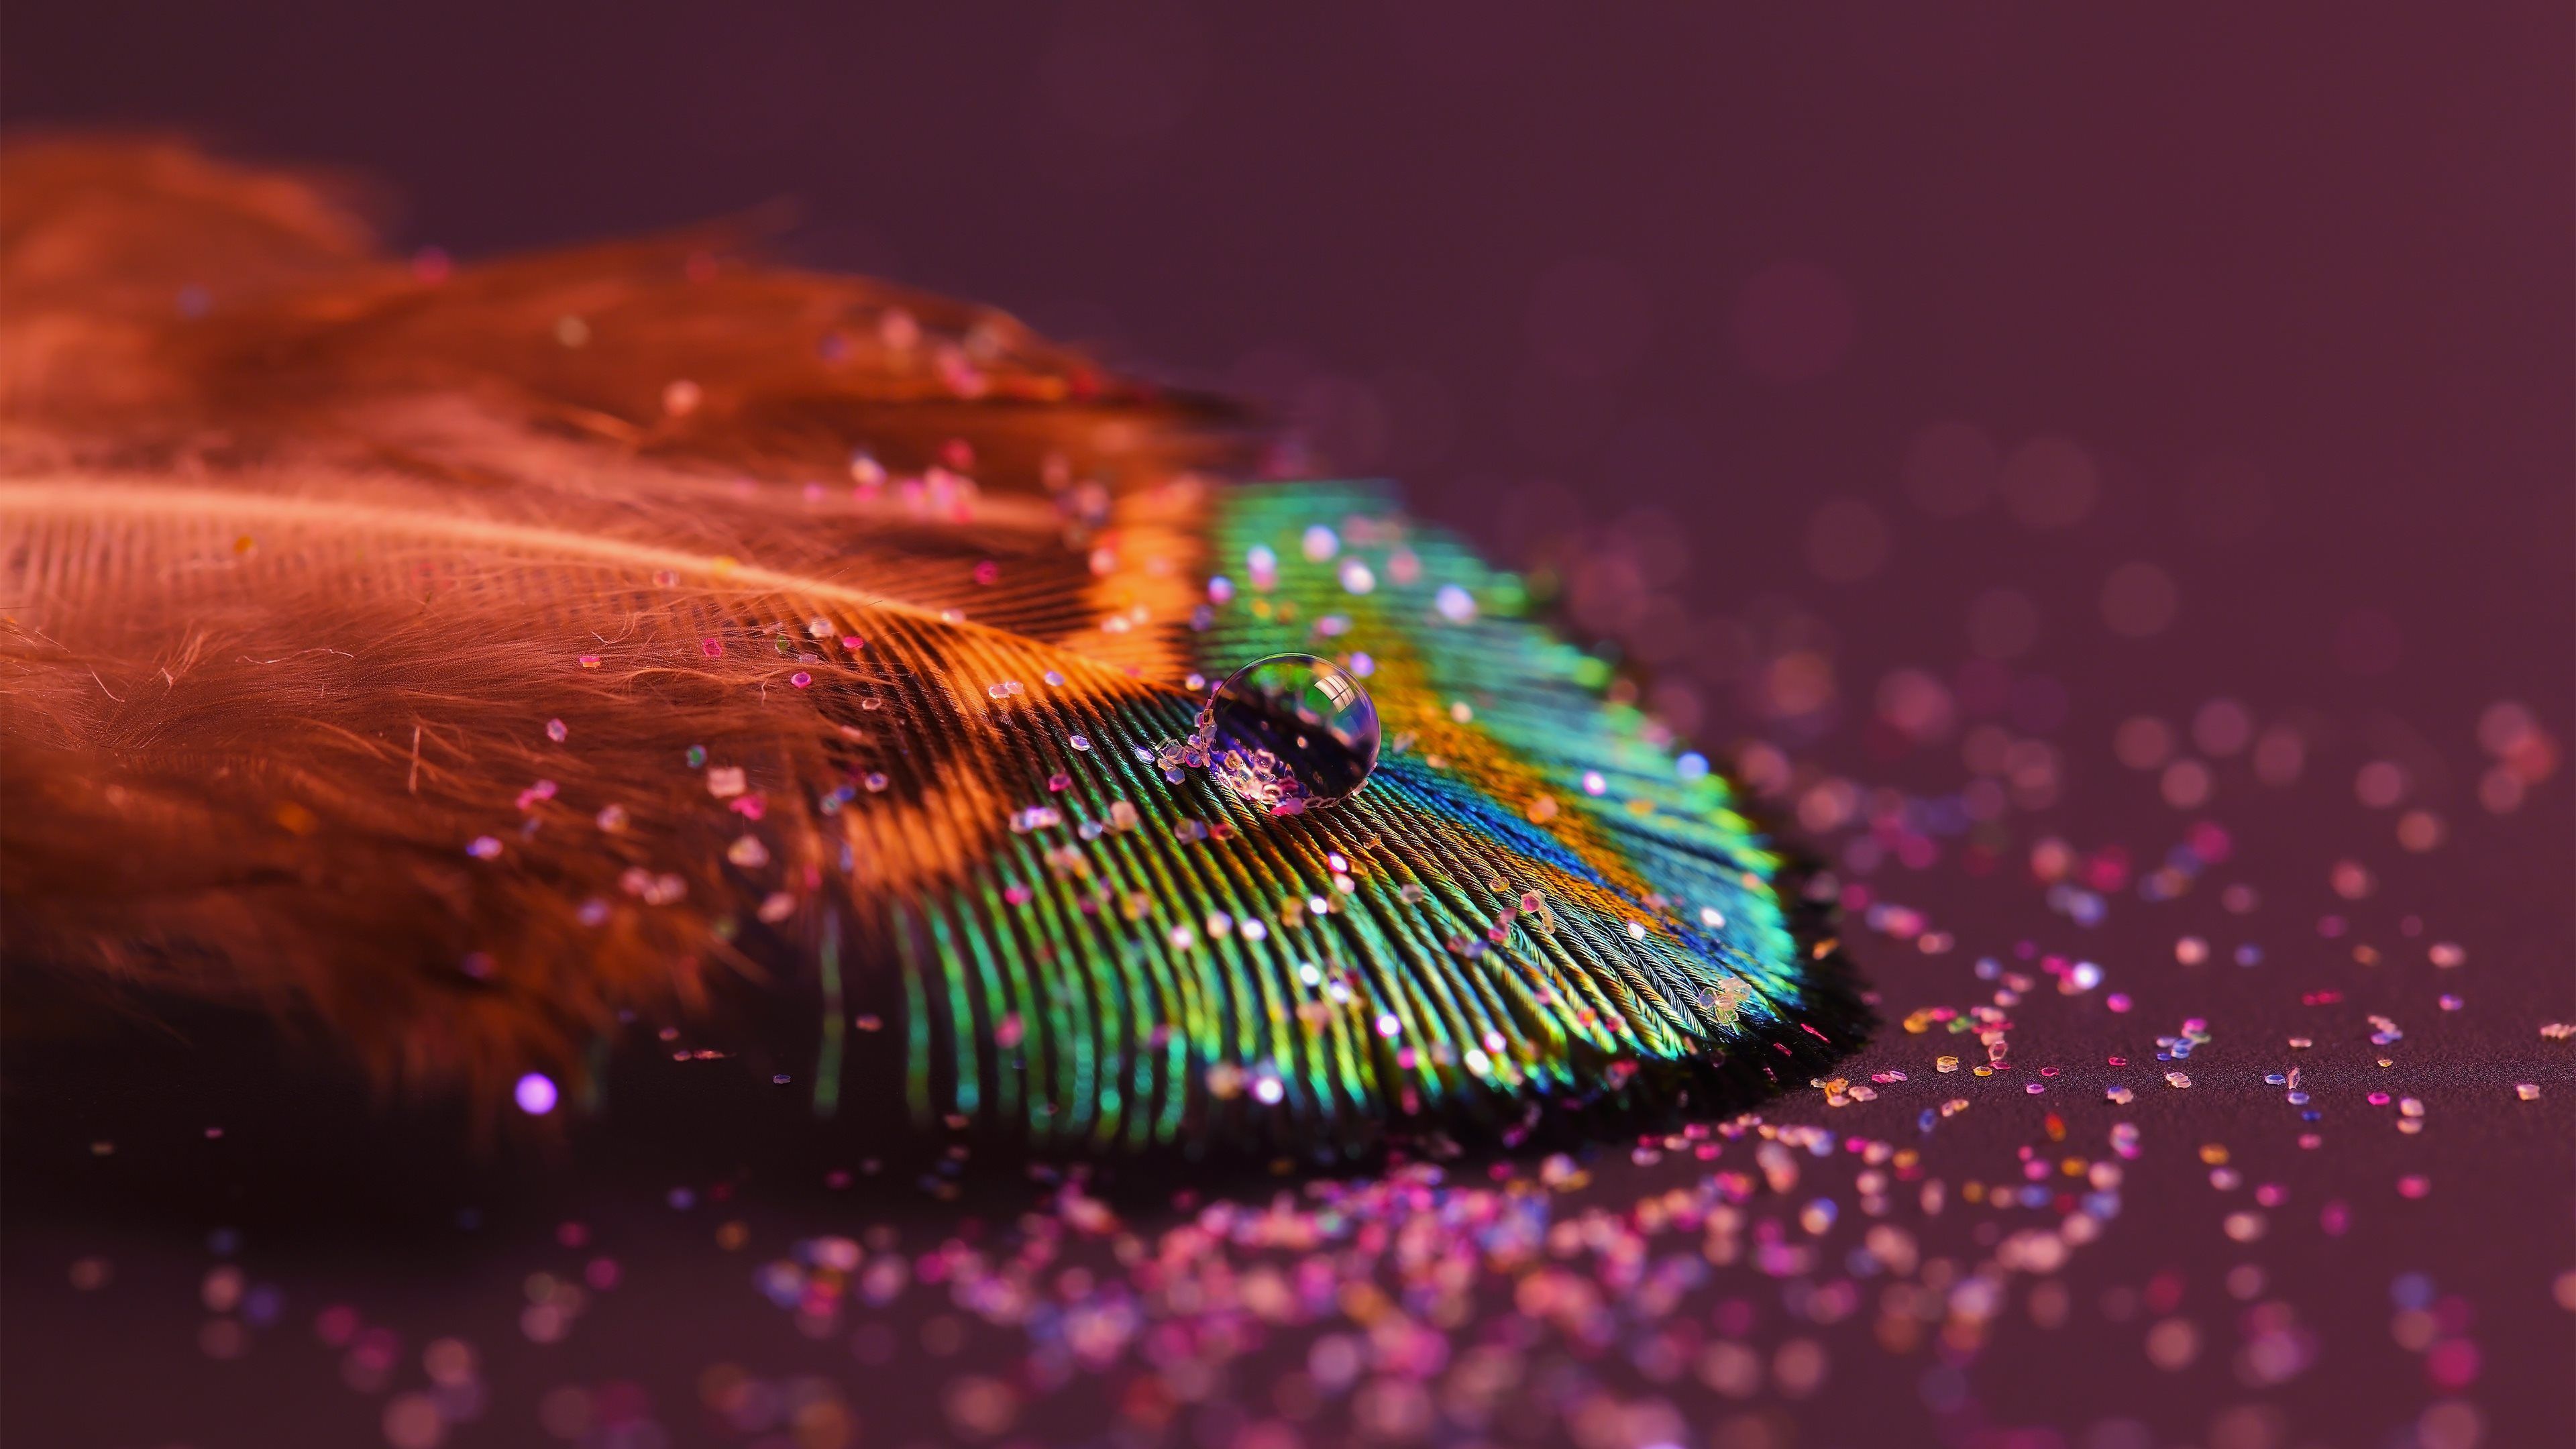 Peacock Feather. Water Drop & Glitter Wallpapers :: HD Wallpapers